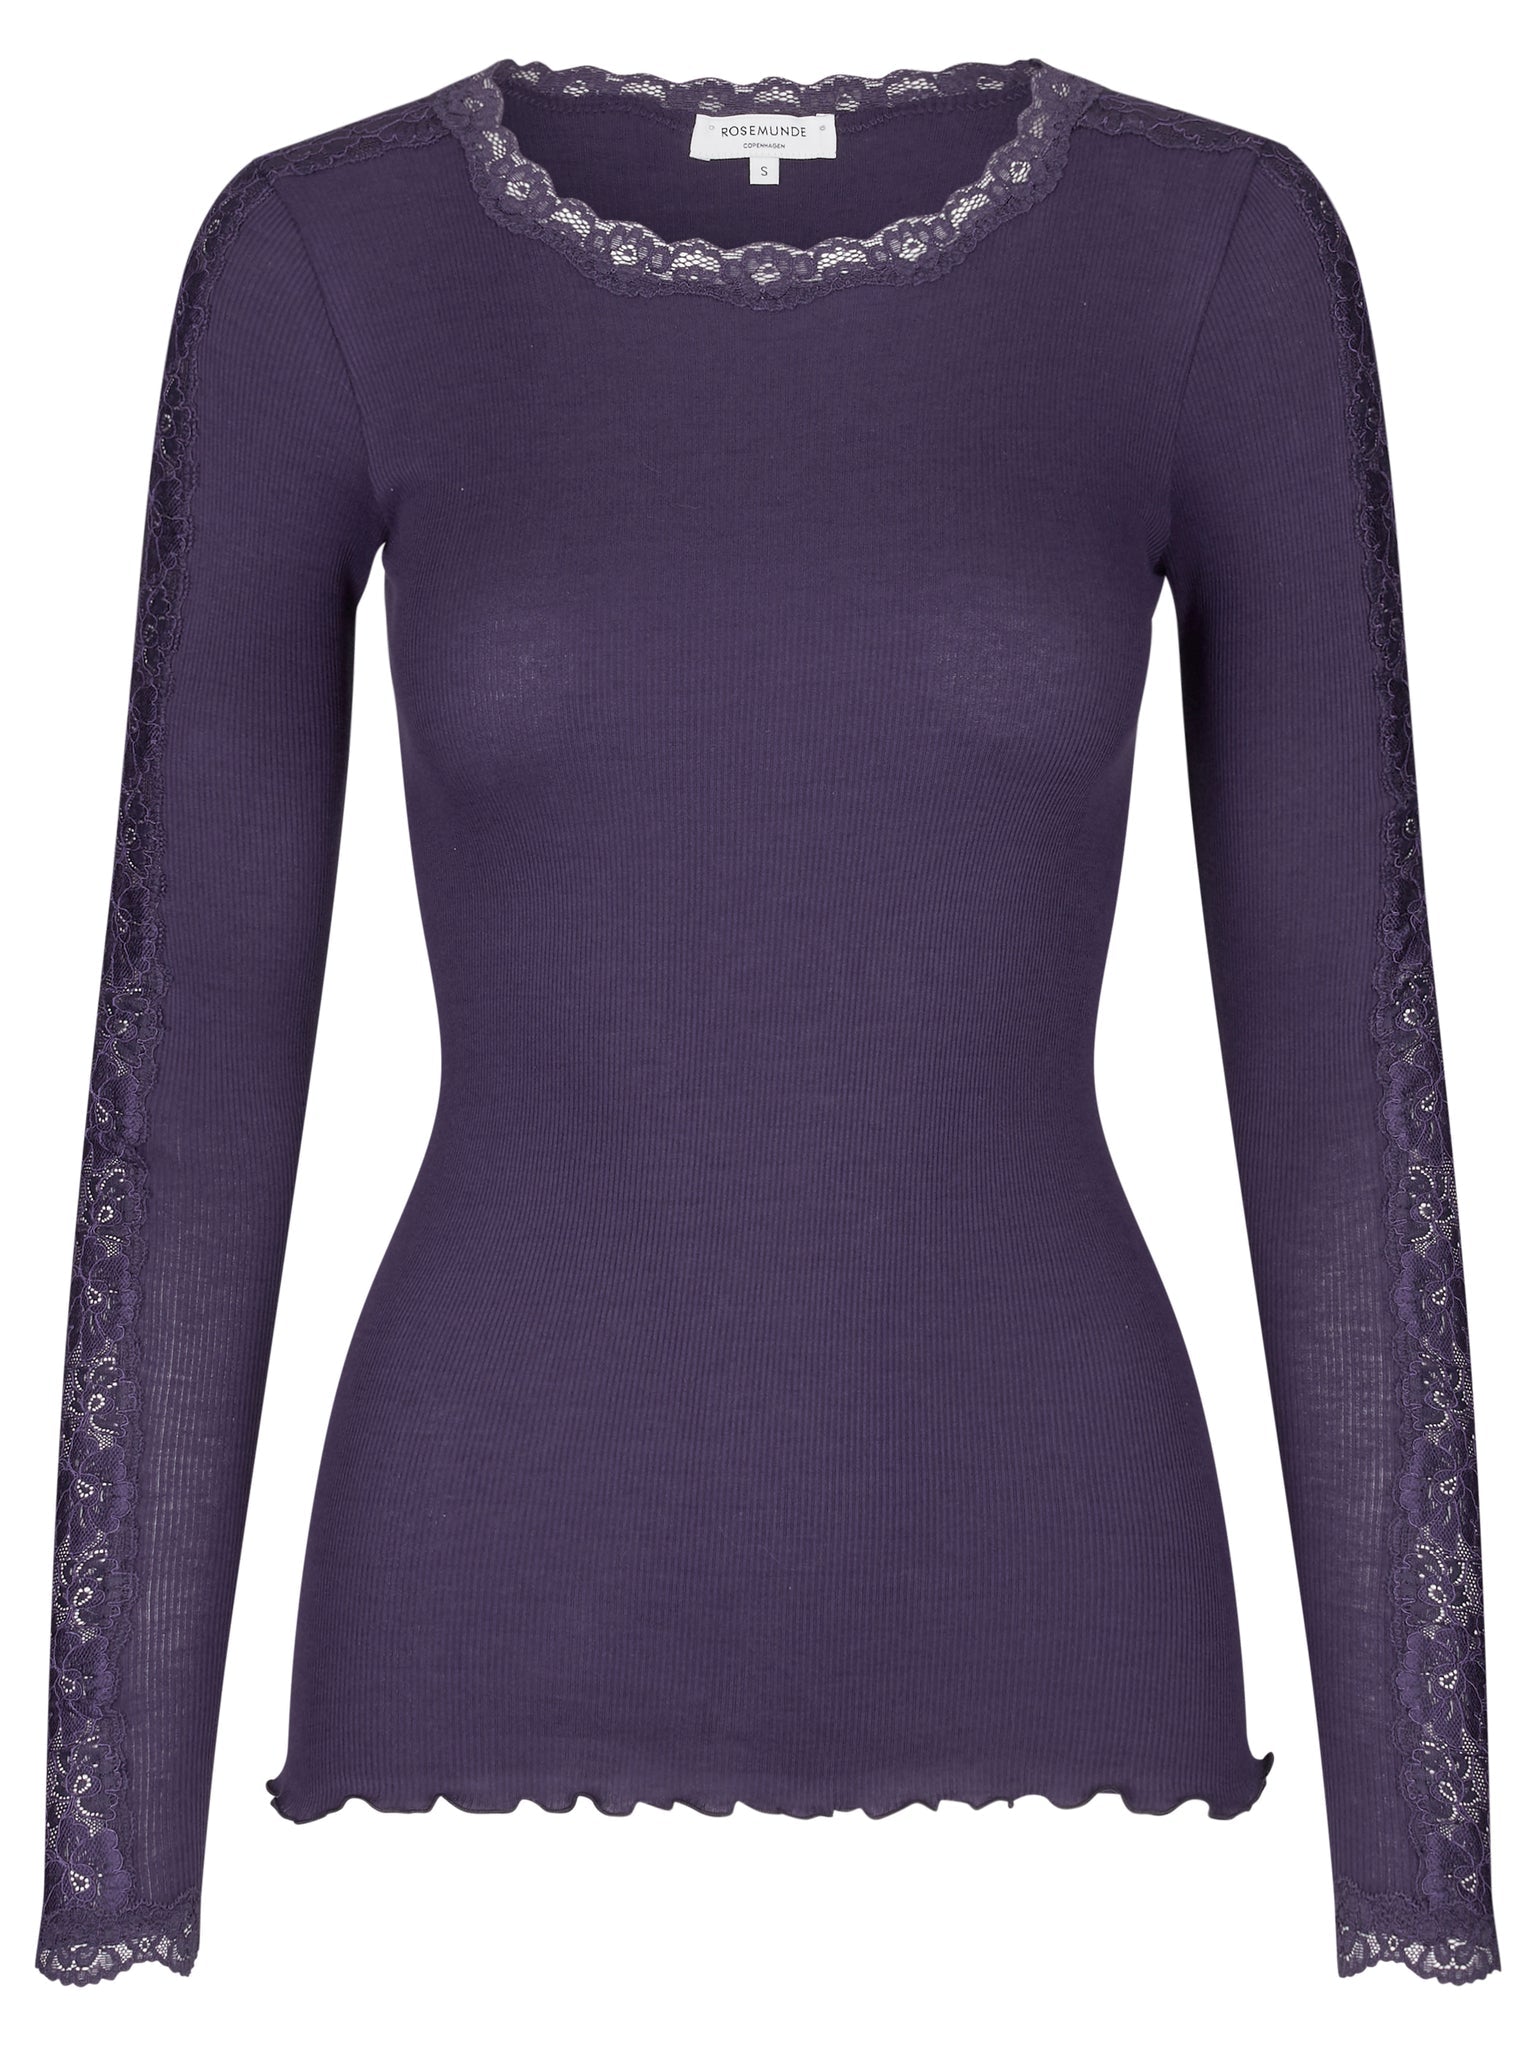 Long sleeved lace blouse